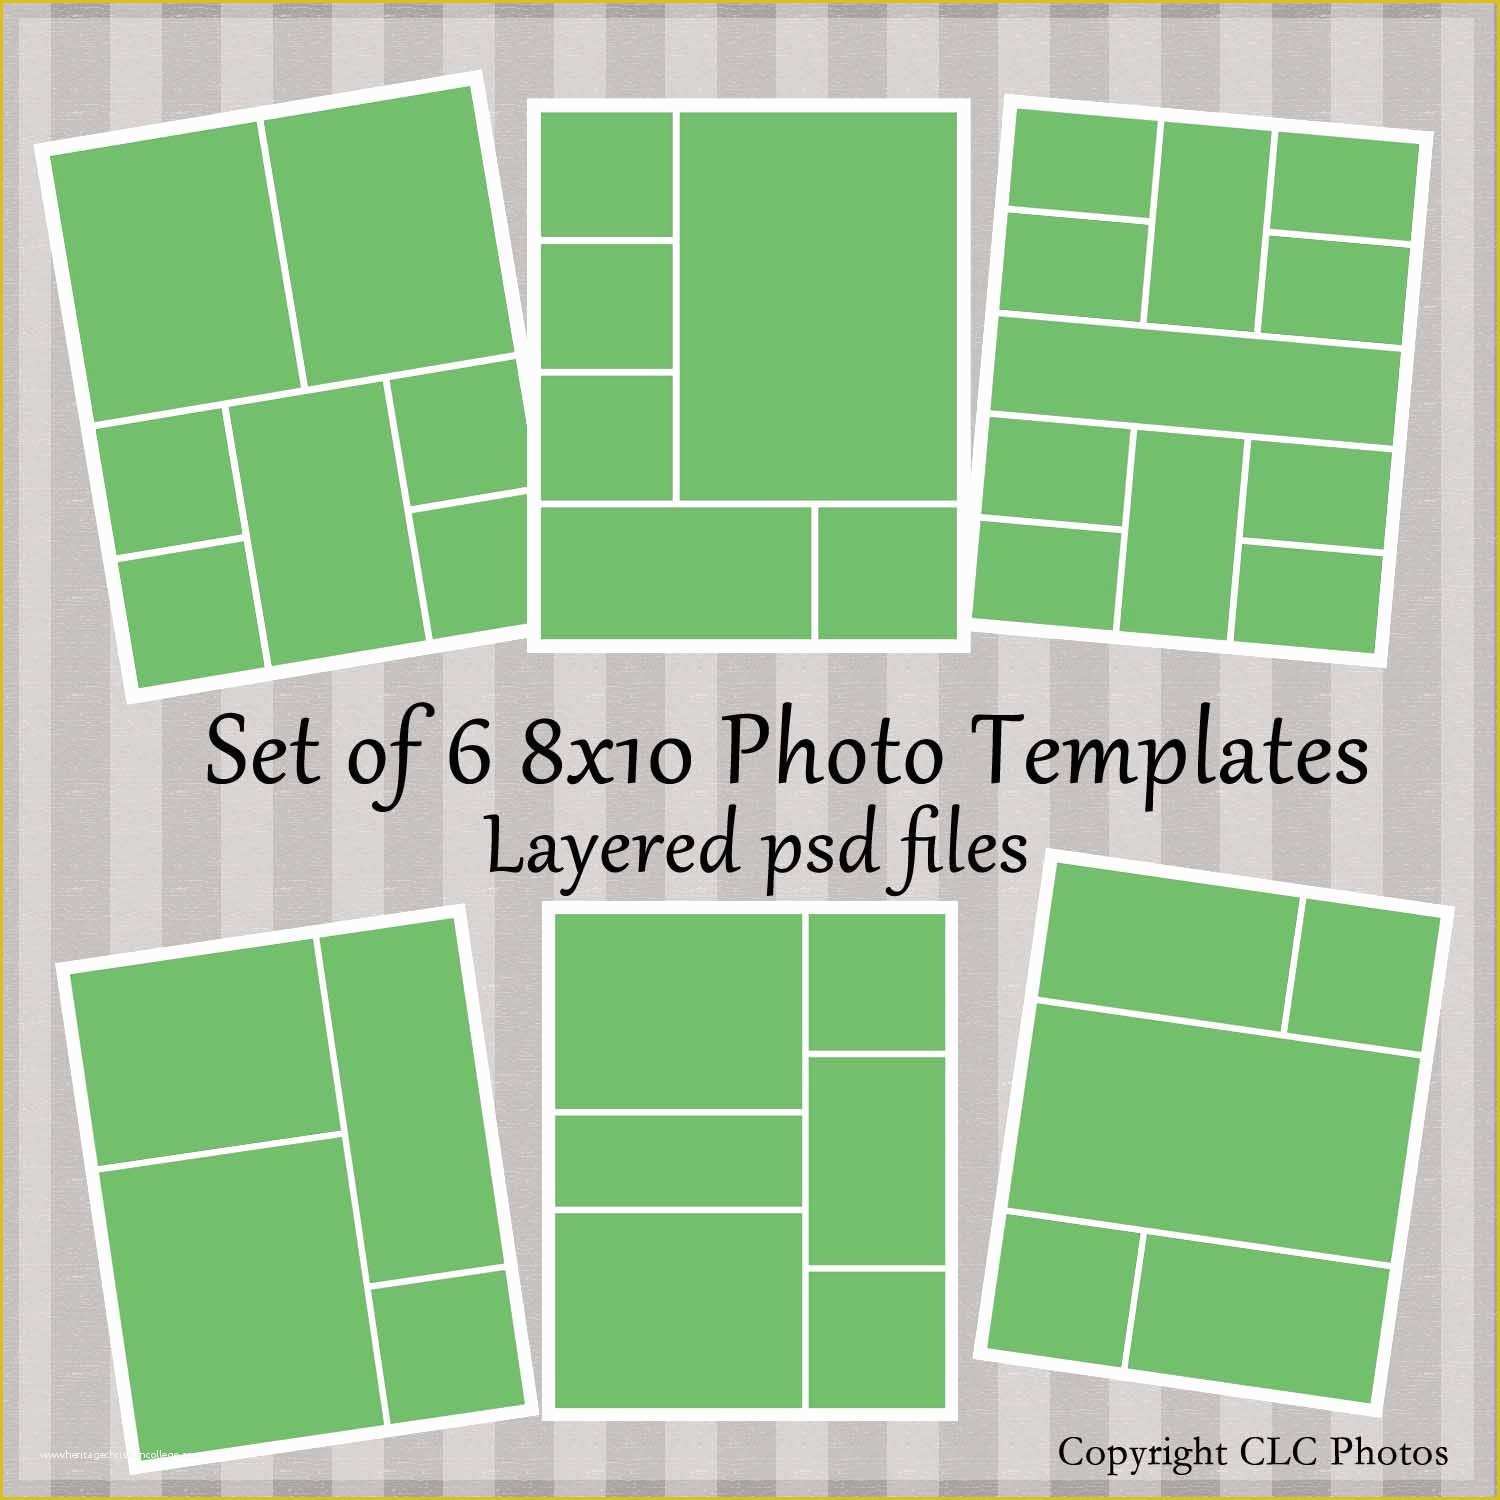 Free Collage Templates Of 8x10 Template Collage Story Board Layered Psd Files Set